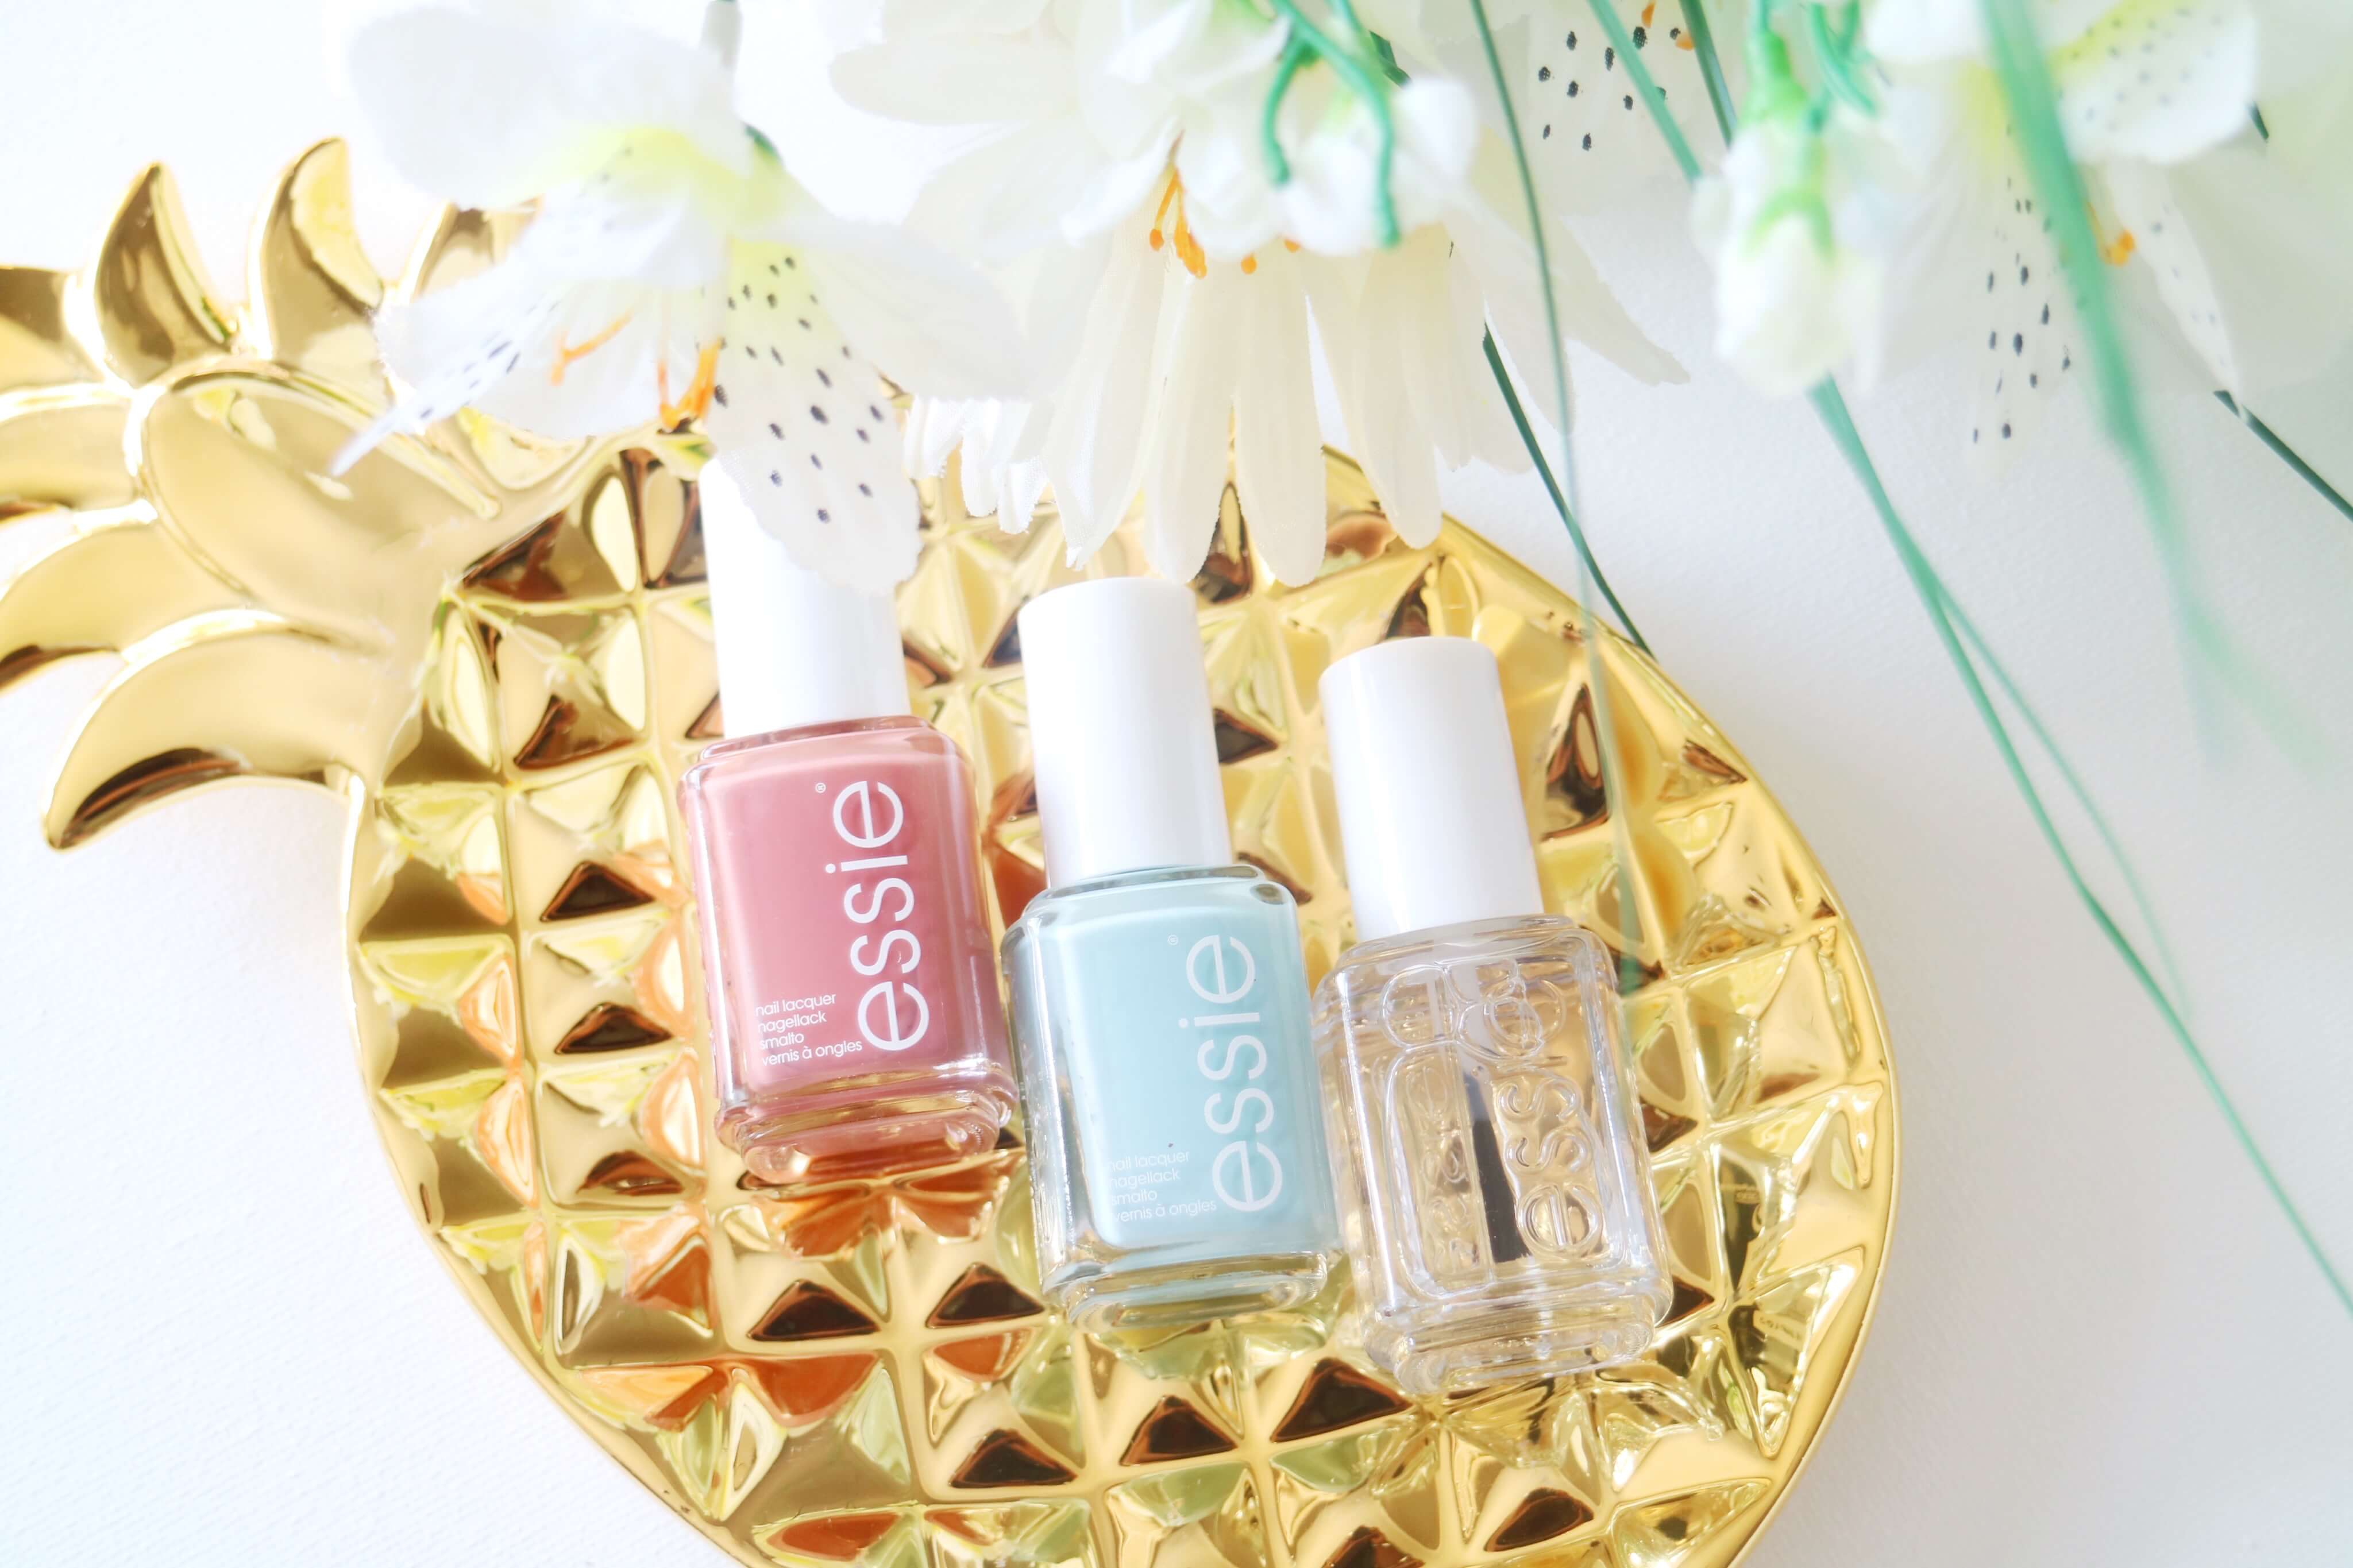 Essie nail polishes resort 2017 collection